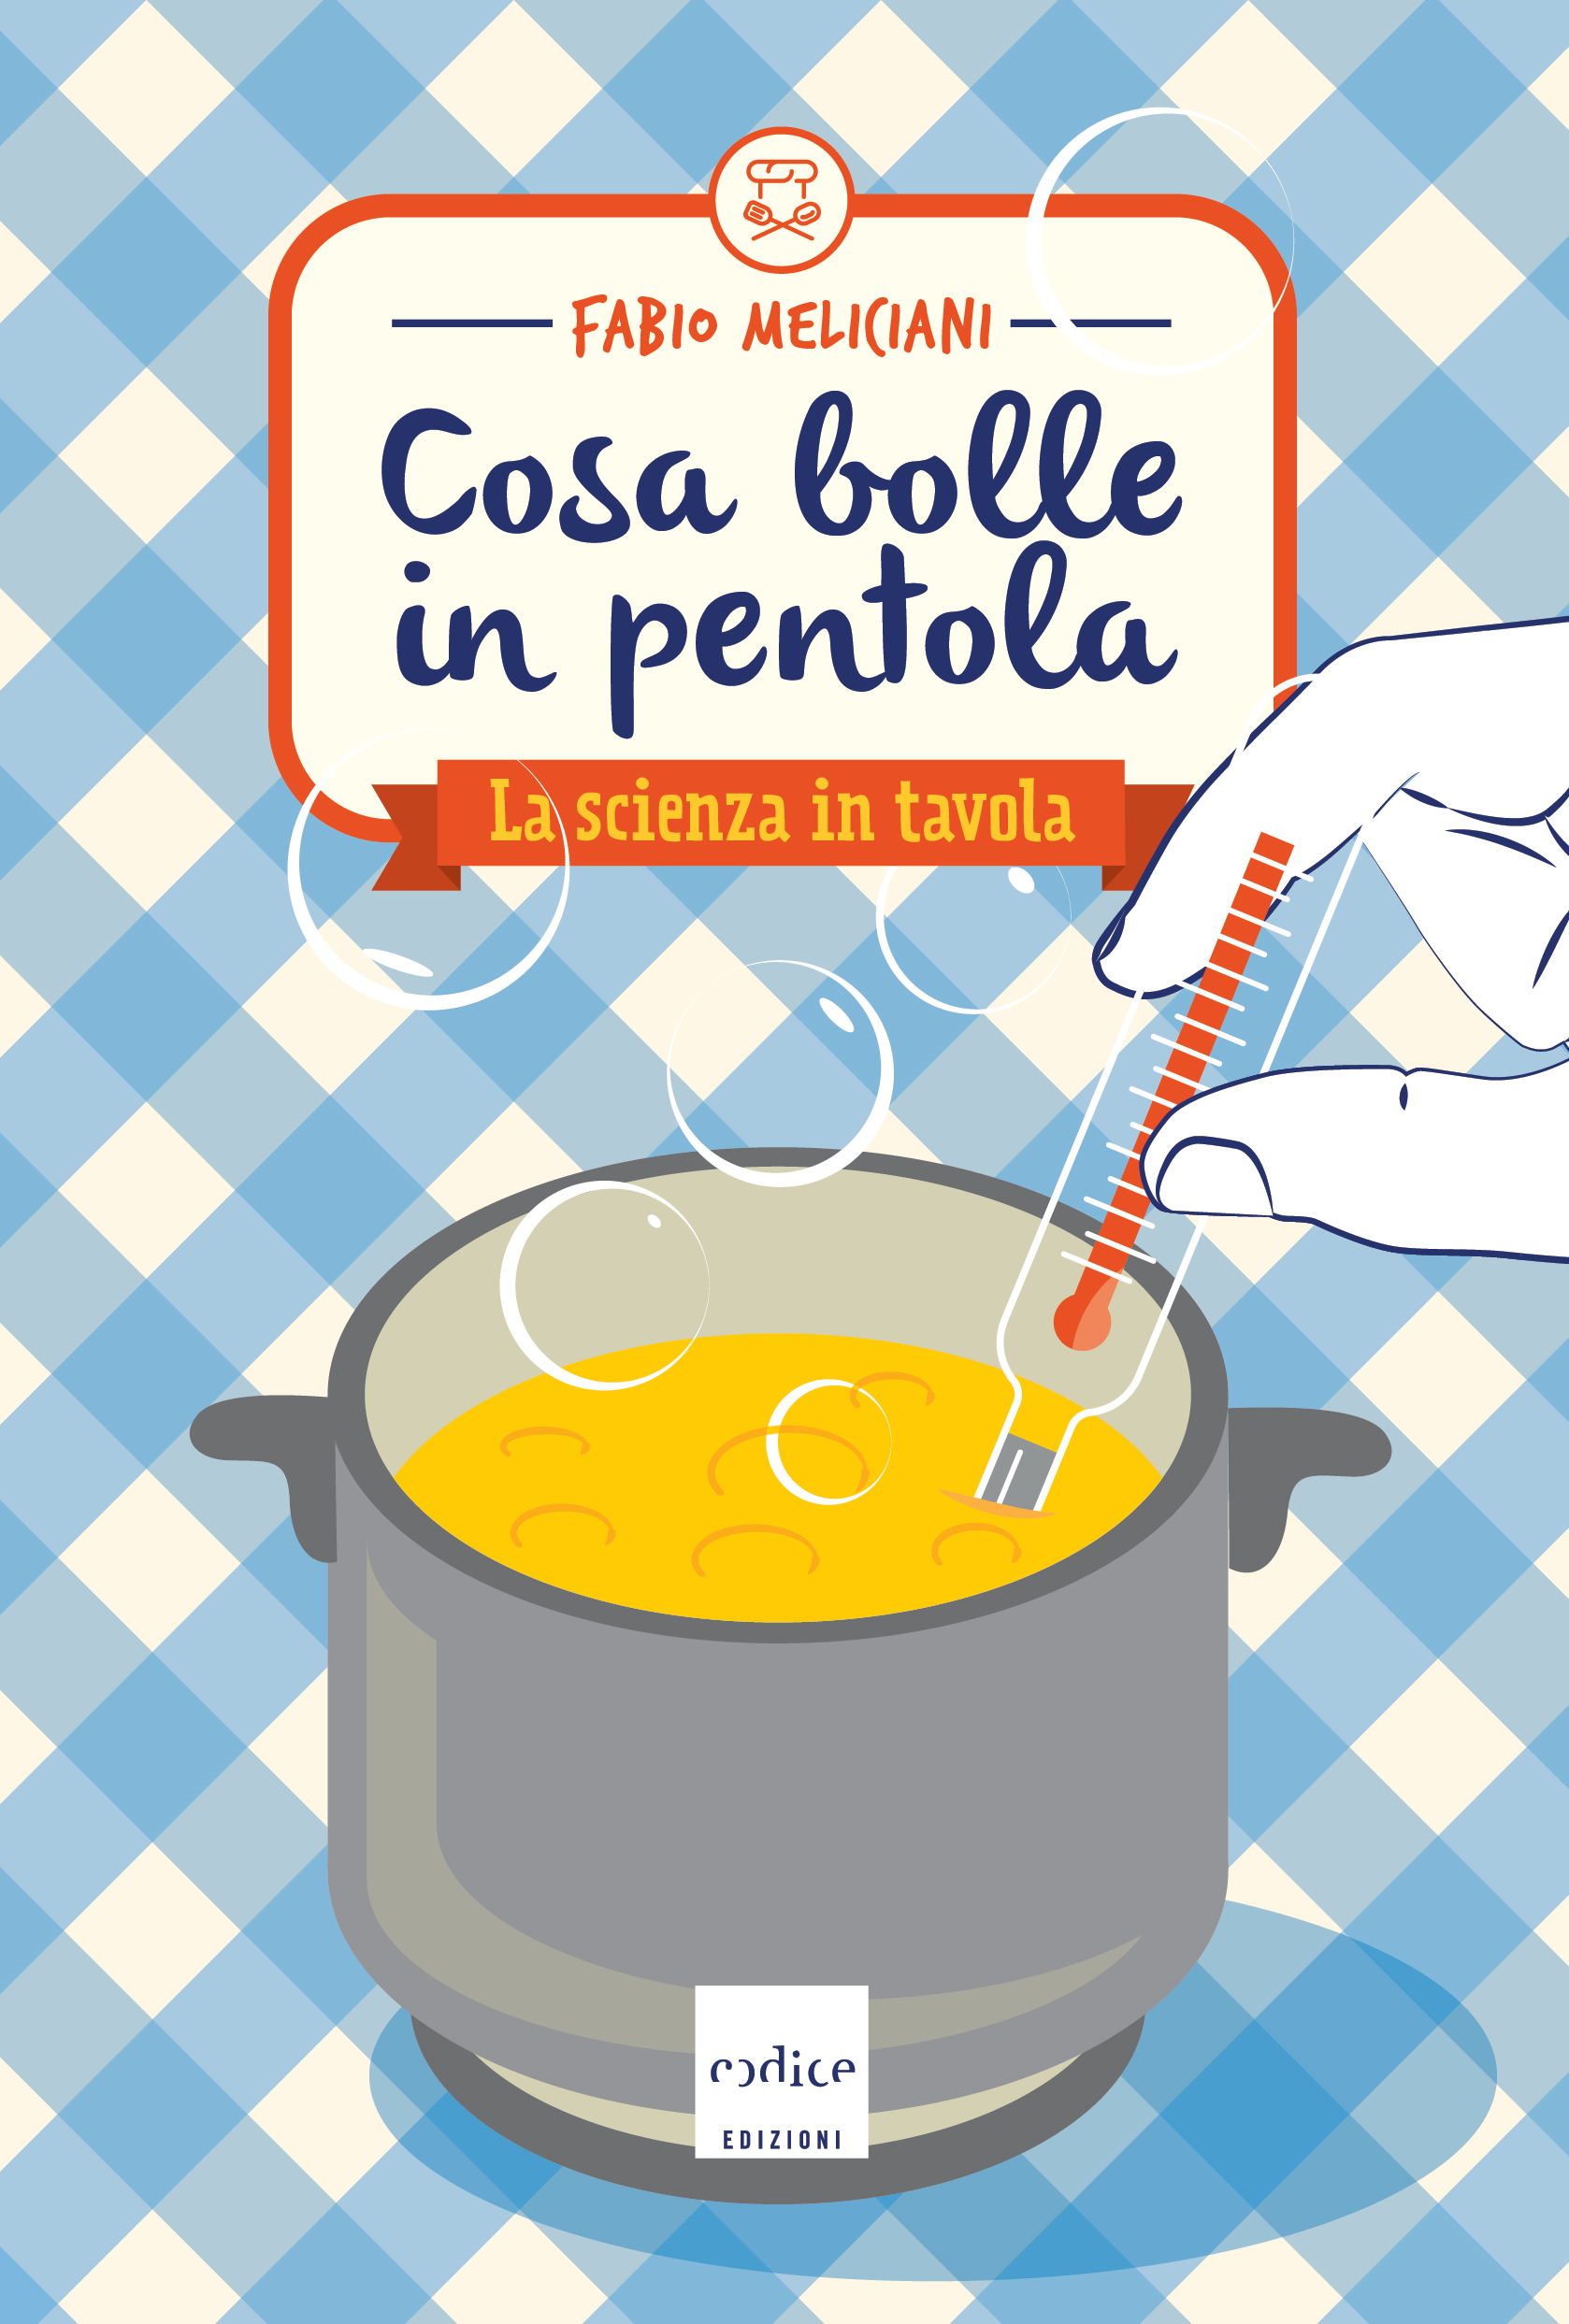 Gold Food Company, “Cosa bolle in pentola”